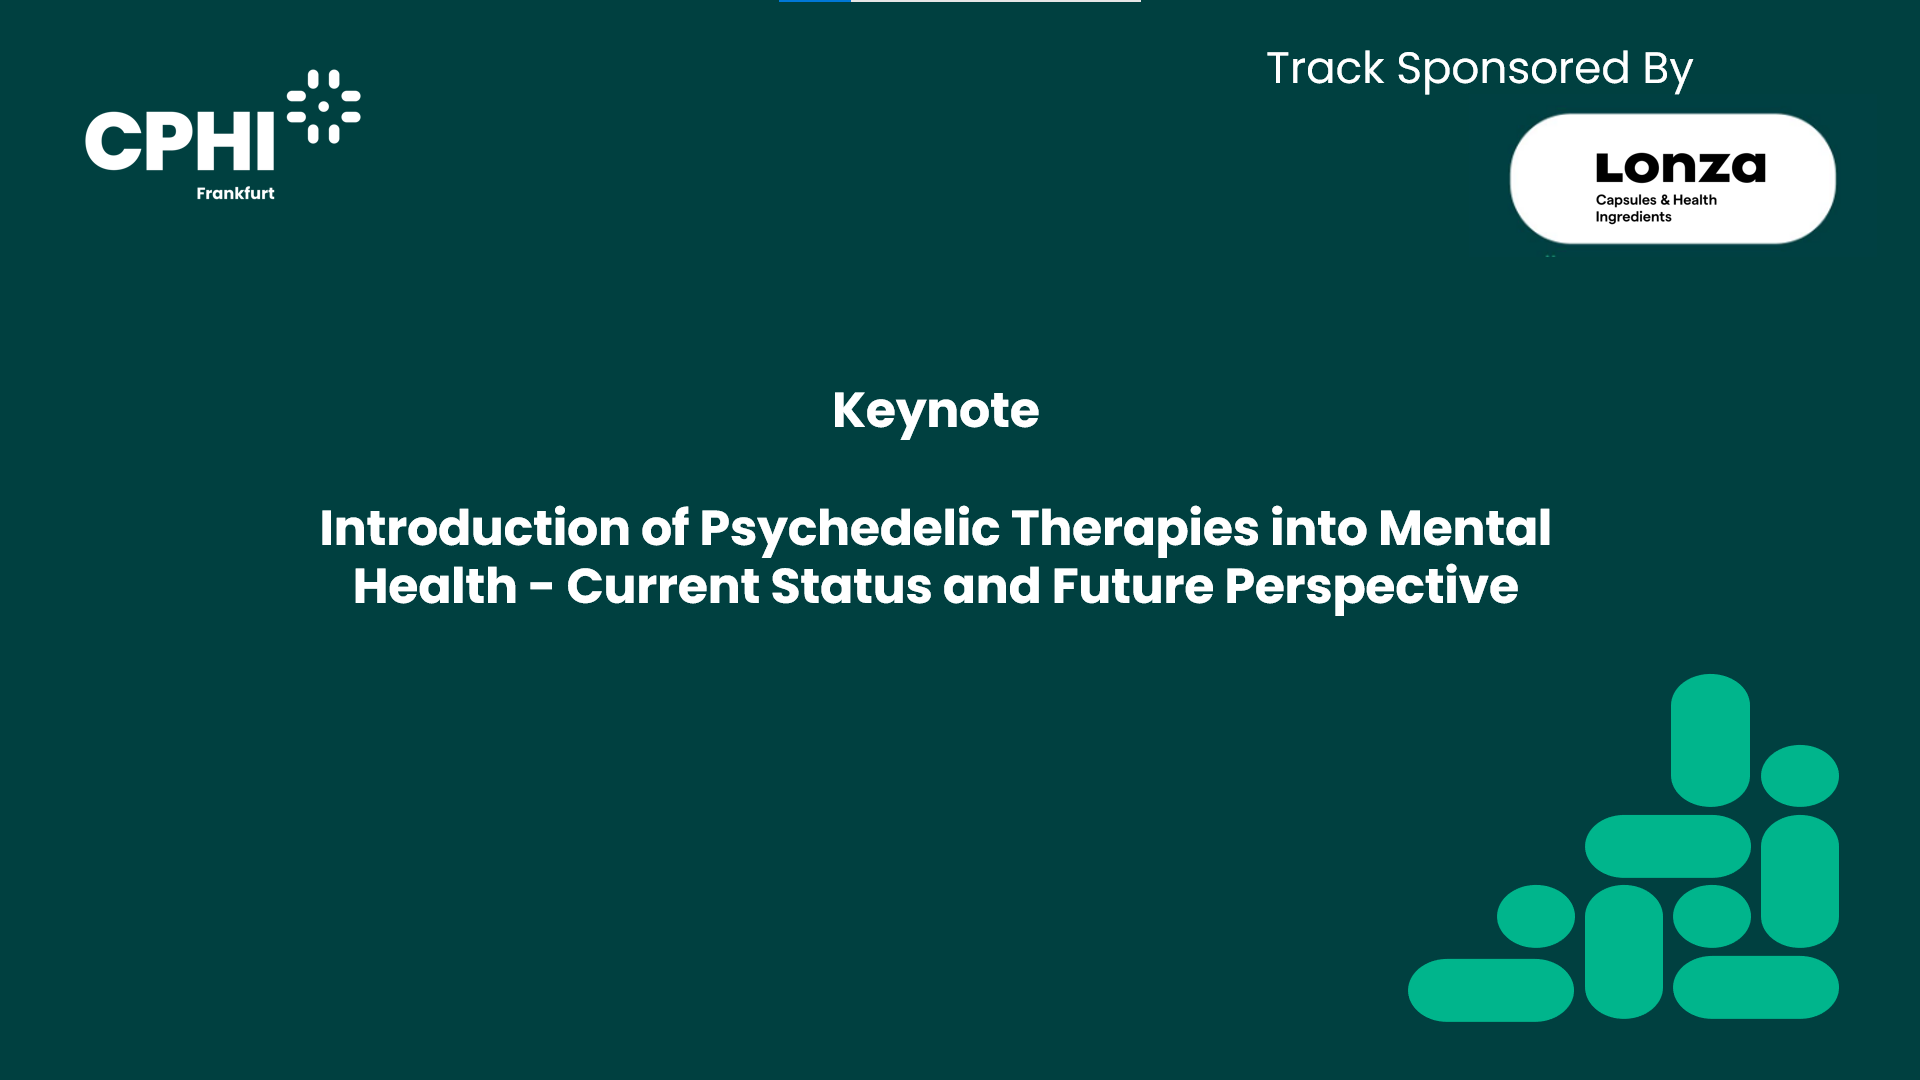 Introduction of Psychedelic Therapies into Mental Health - Current Status and Future Perspective